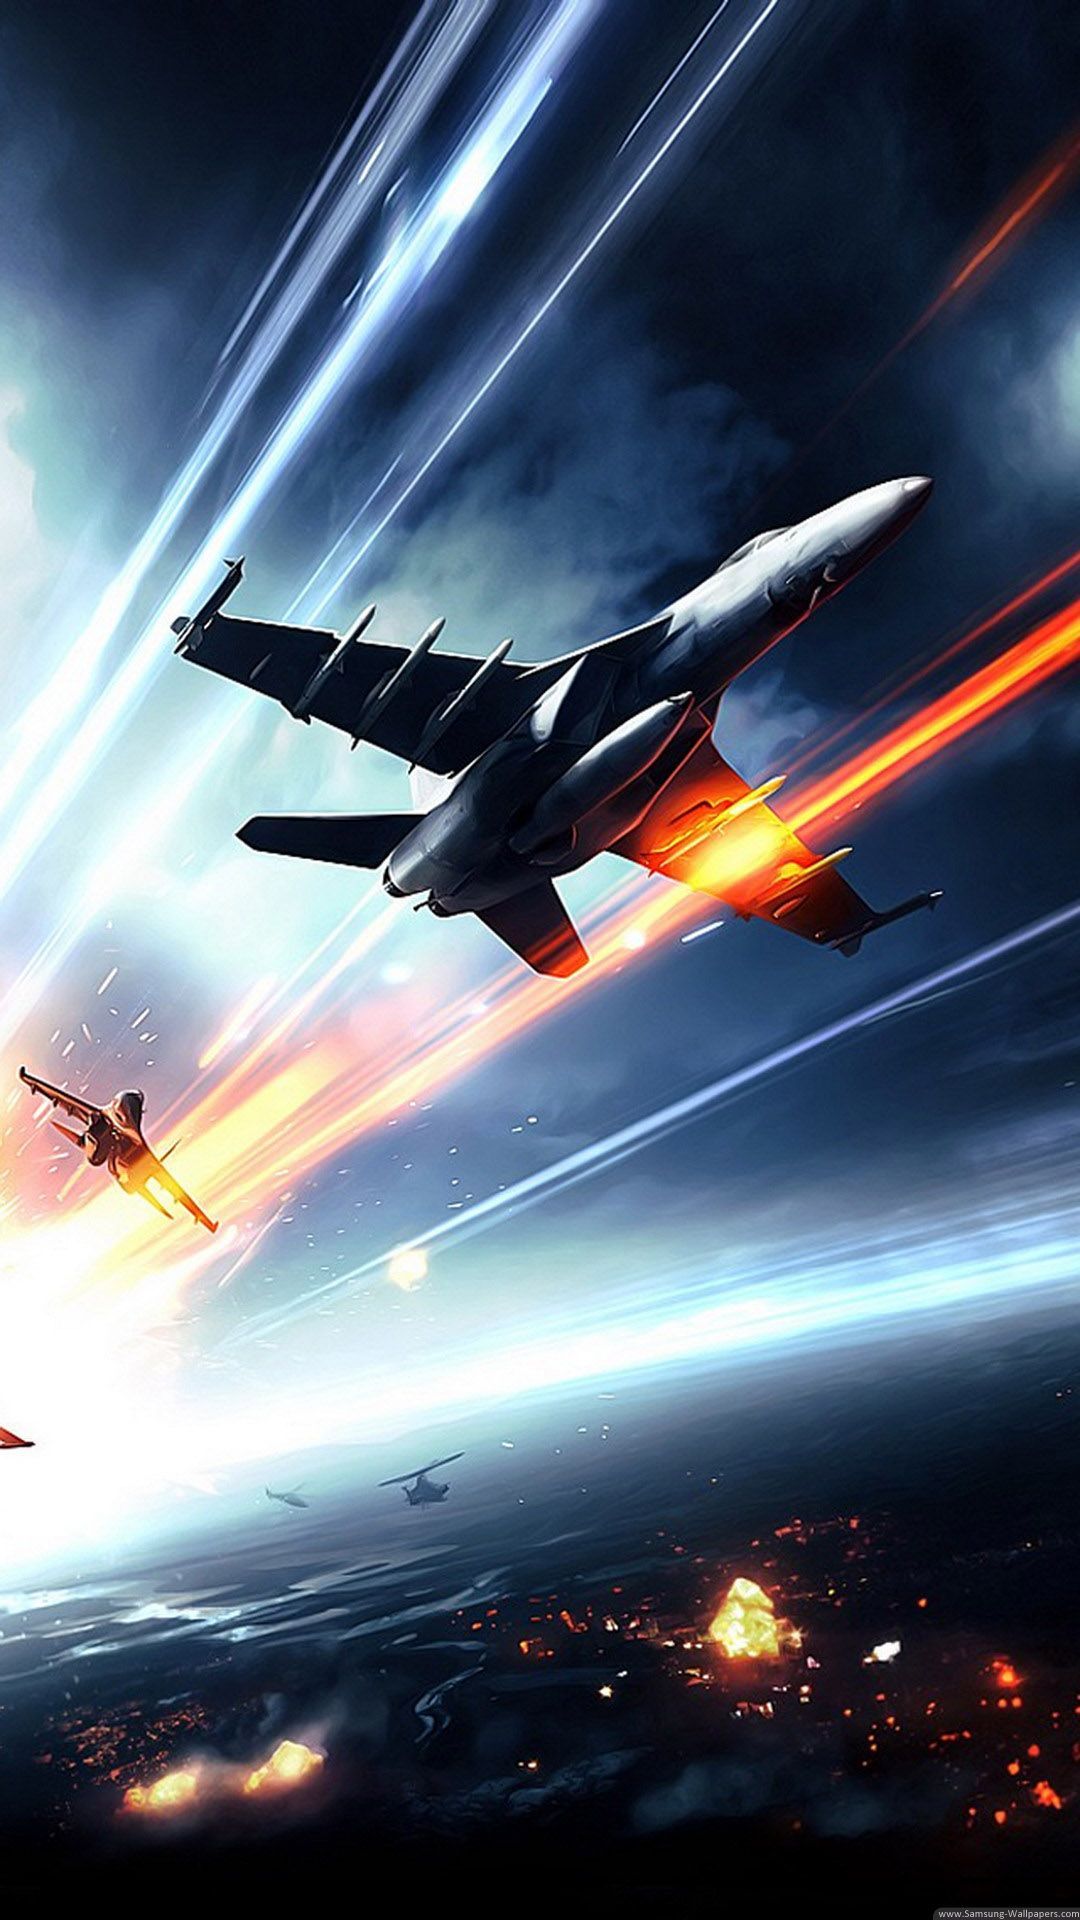 Marvelous Game iPhone Wallpaper For Gamers. Fighter jets, Military wallpaper, Battlefield 3